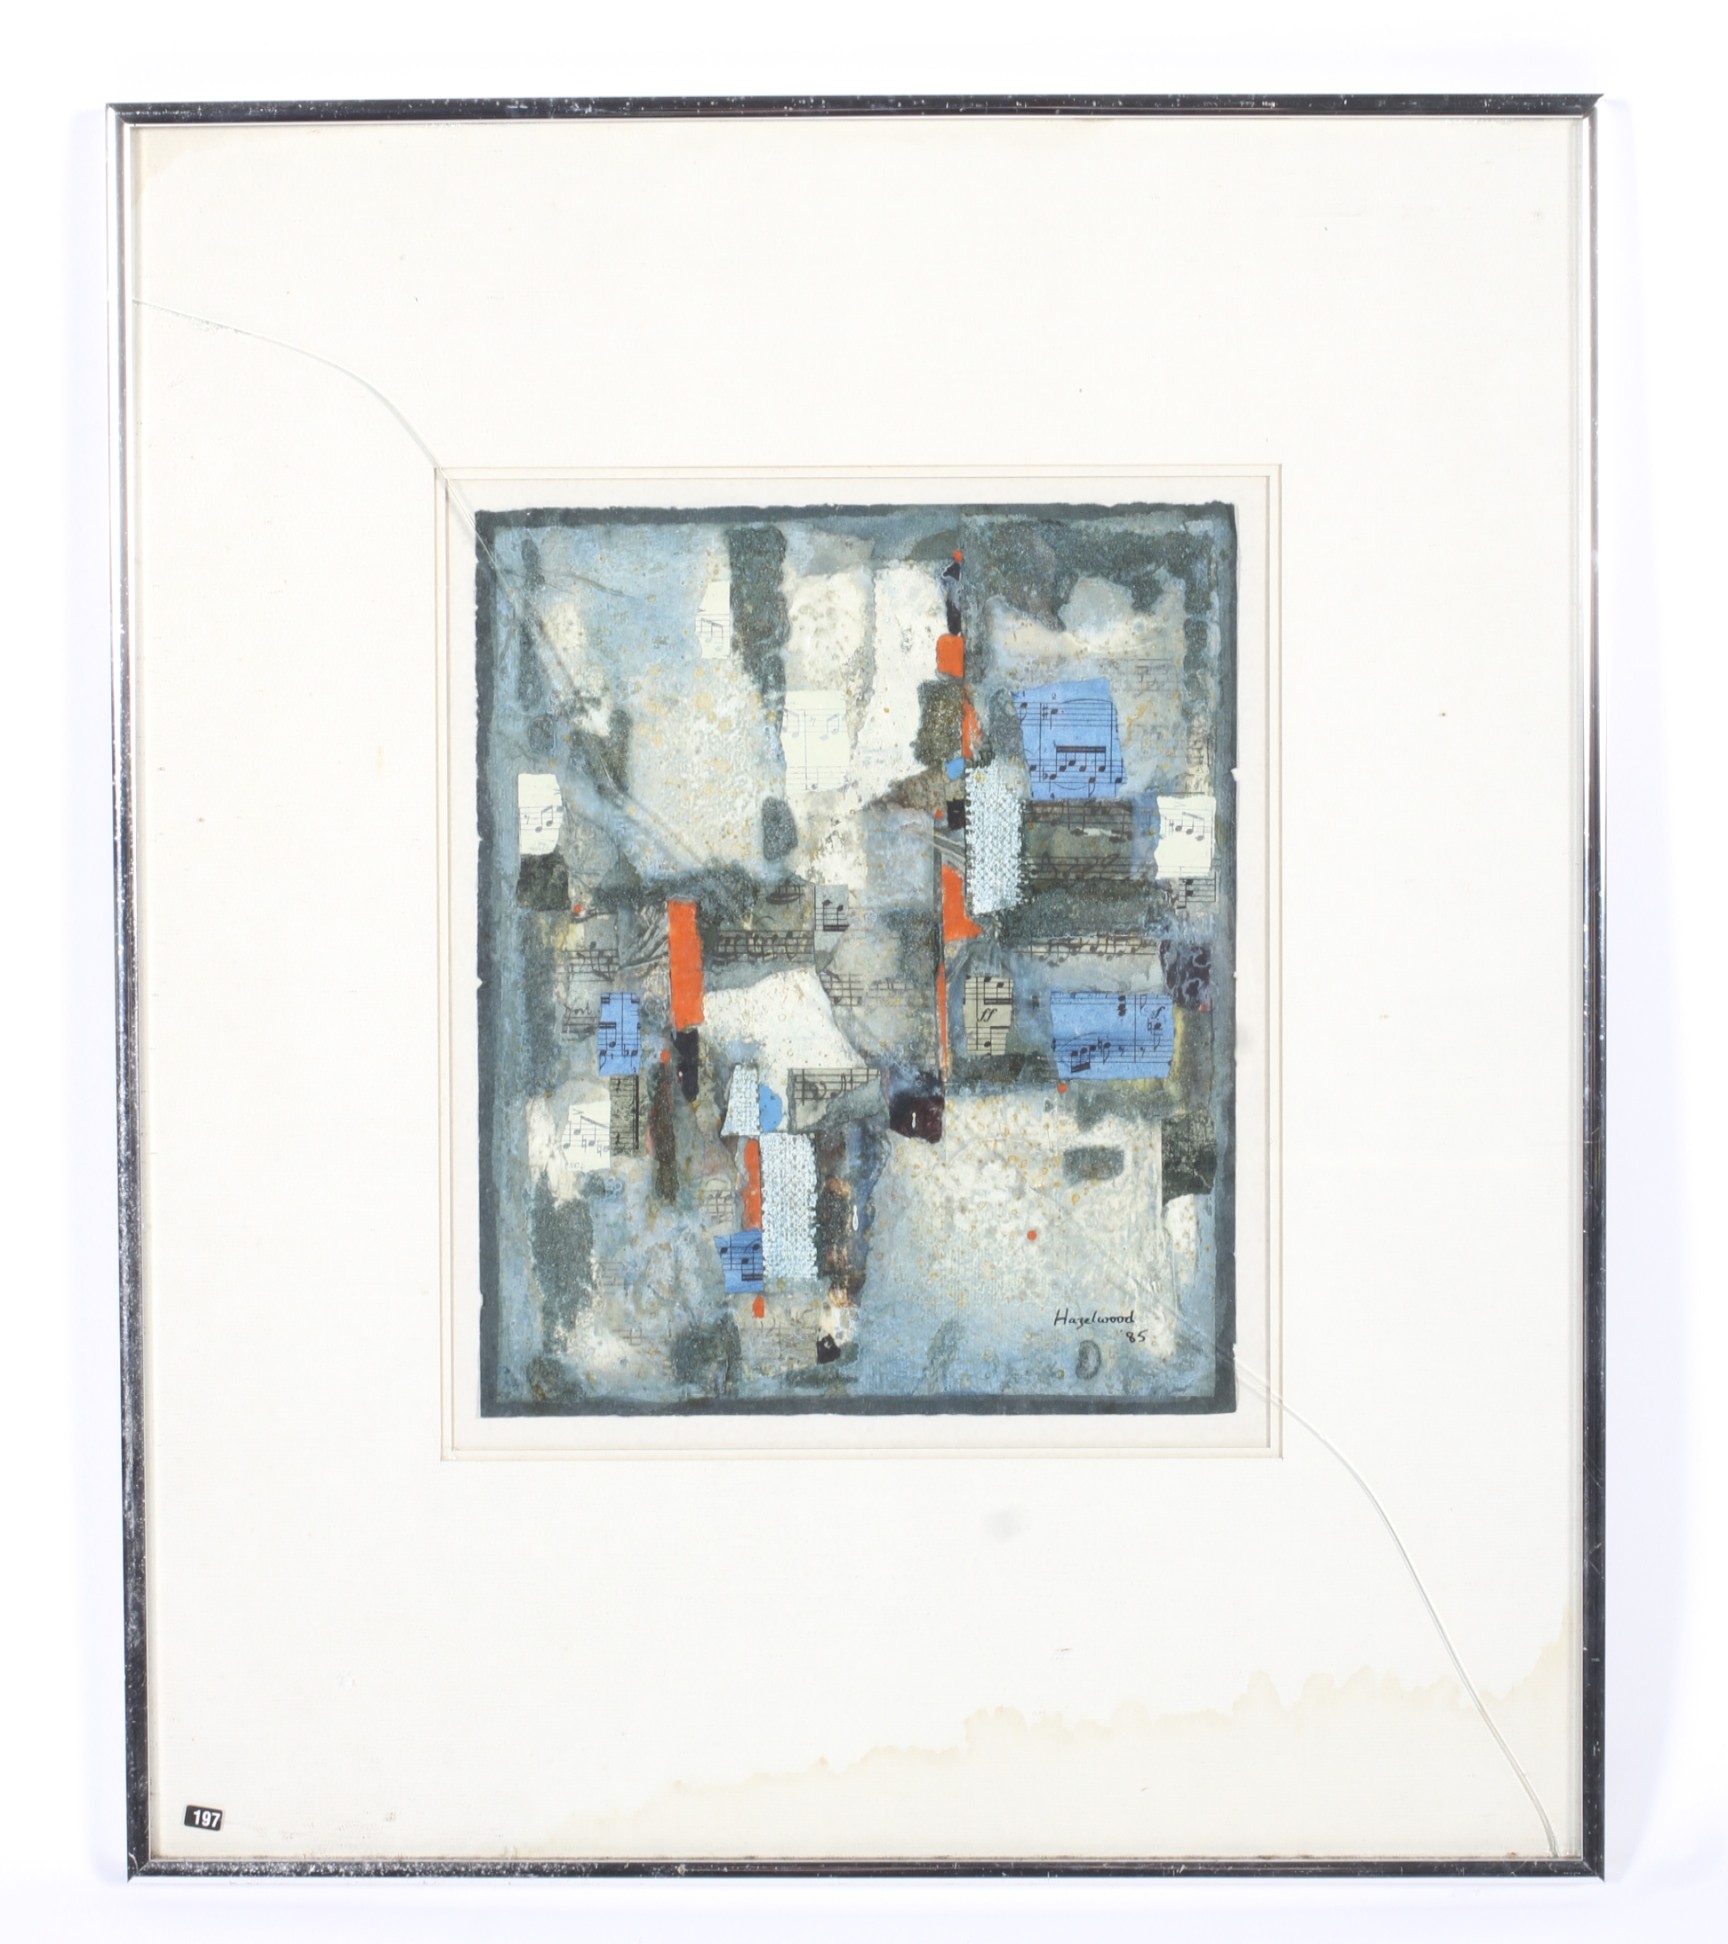 David Hazelwood (British, 1932-1994), Cantabile, signed and dated 1985 lower right, collage, framed,